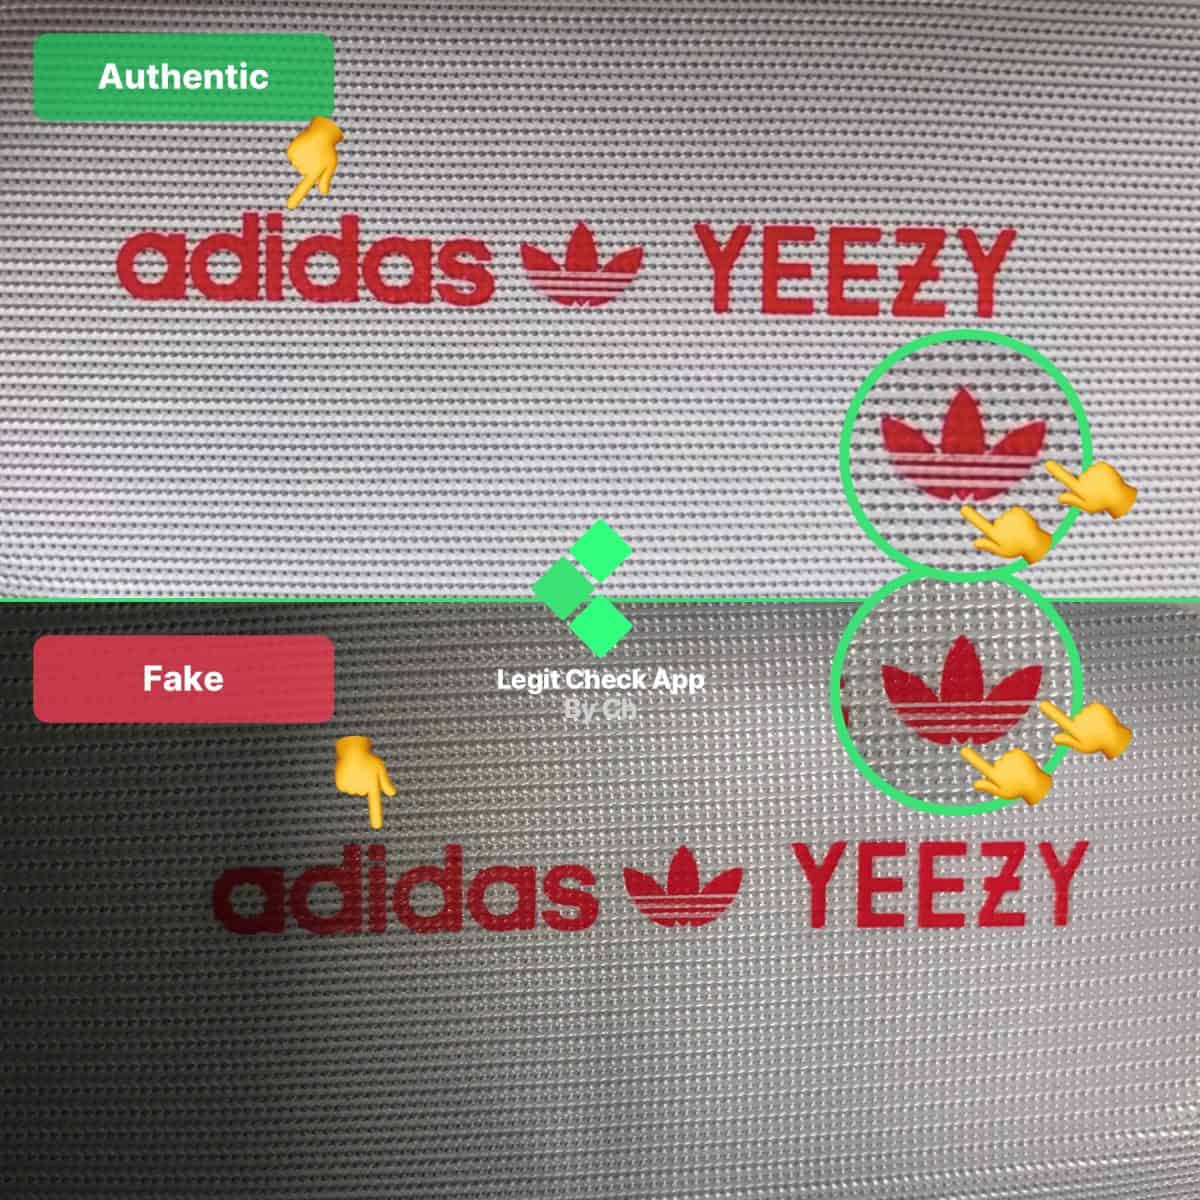 Yeezy Blue Tint V2 Insole Check